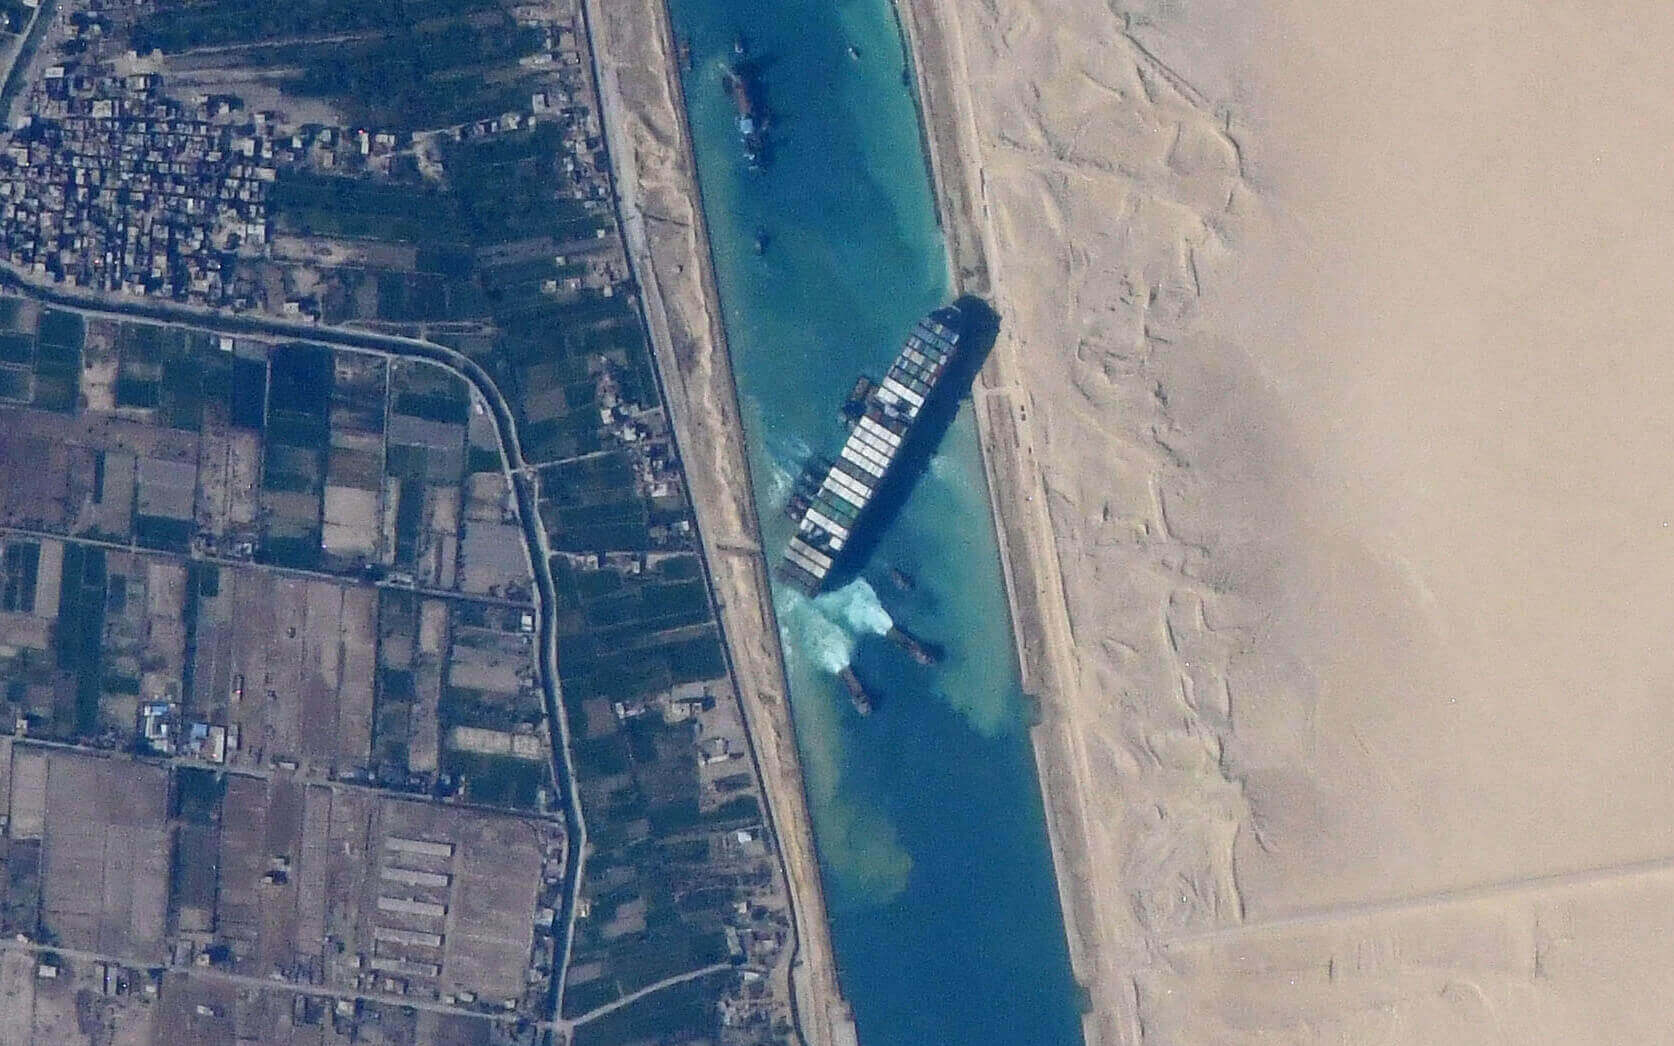 A satellite photo of the container ship Ever Given obstructing the green-hued Suez Canal. To the left of the canal are green agriculture fields. To the right are tan-colored sand dunes.